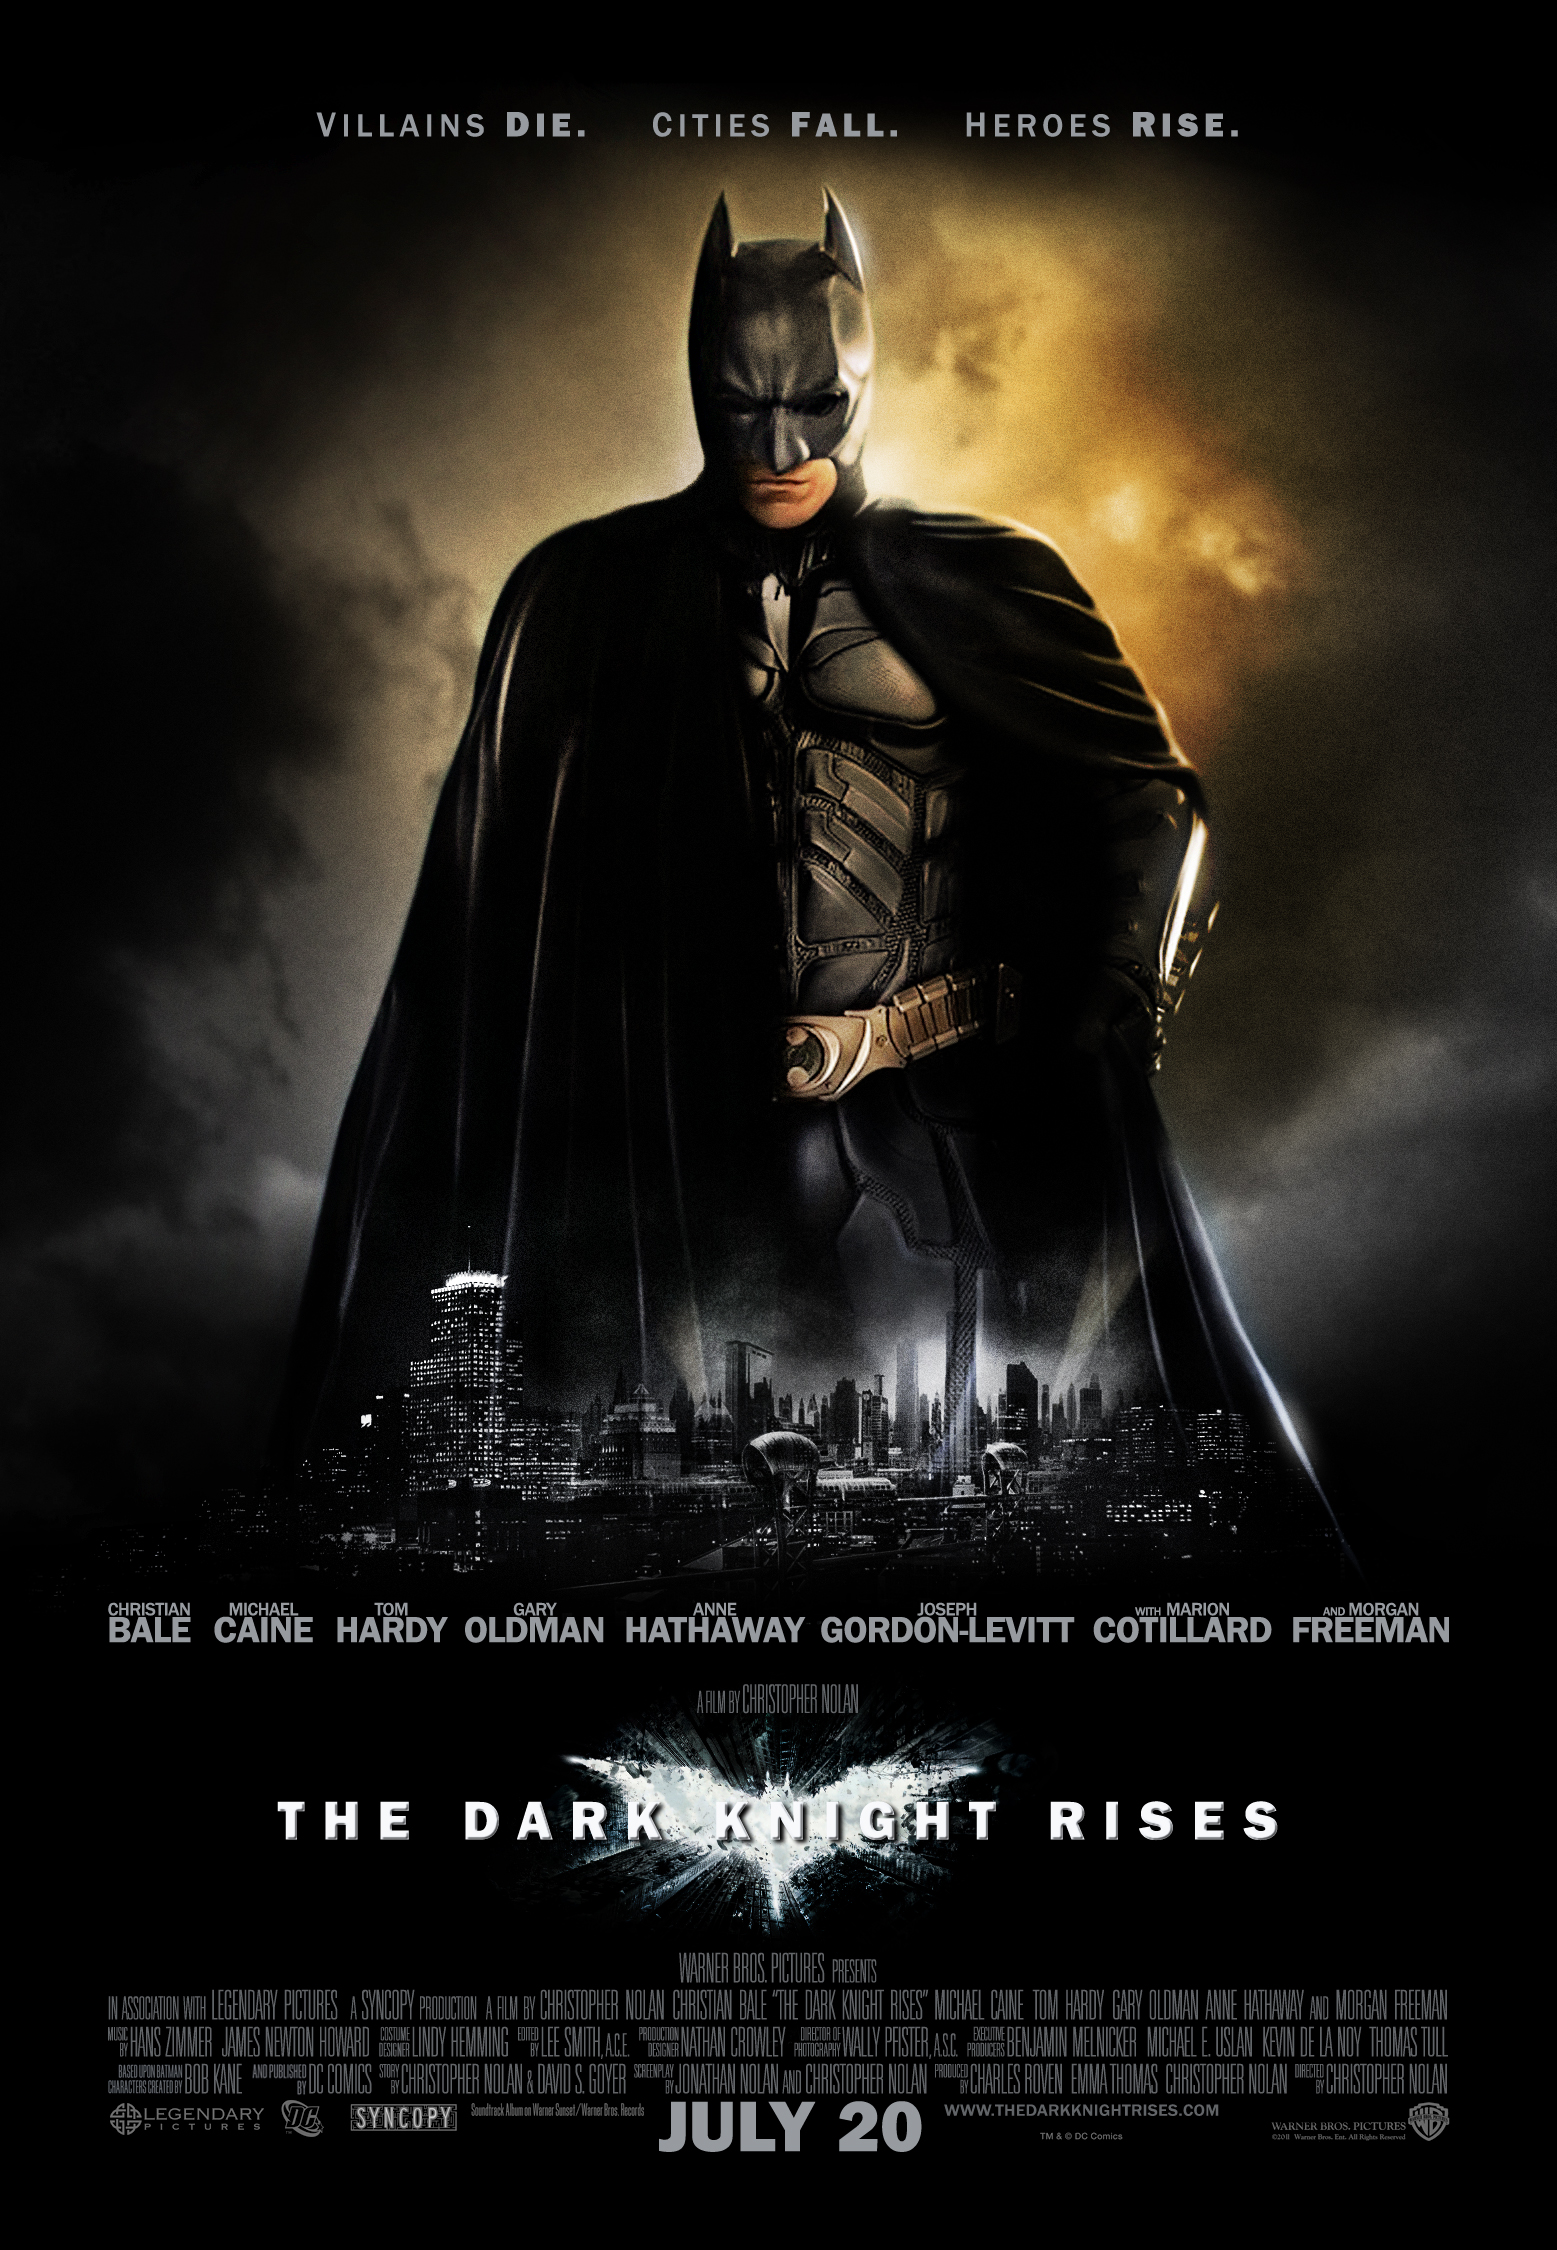 The Dark Knight Rises' Poster by themadbutcher on DeviantArt